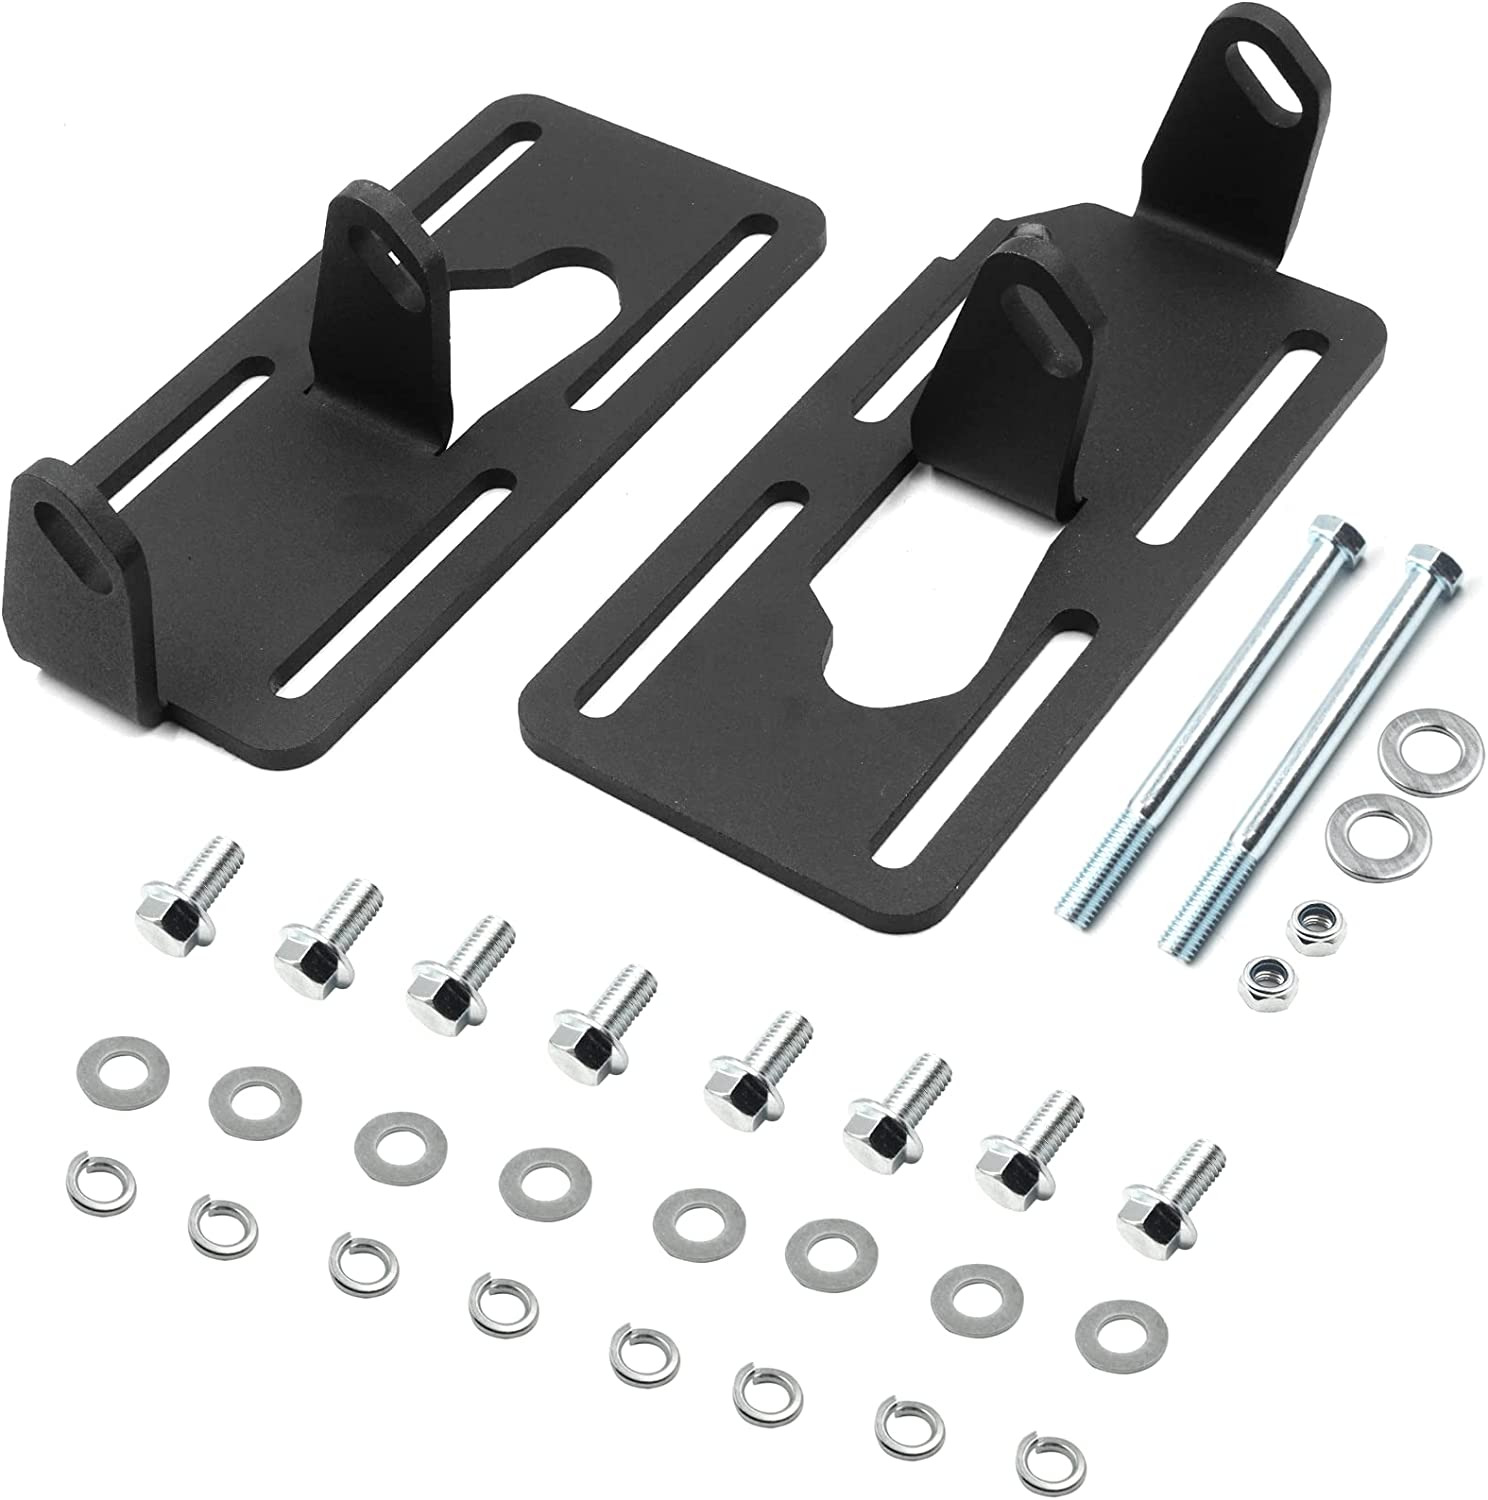 LS Conversion Engine Swap Mounts Compatible with 1973-1998 Square Body / OBS Che